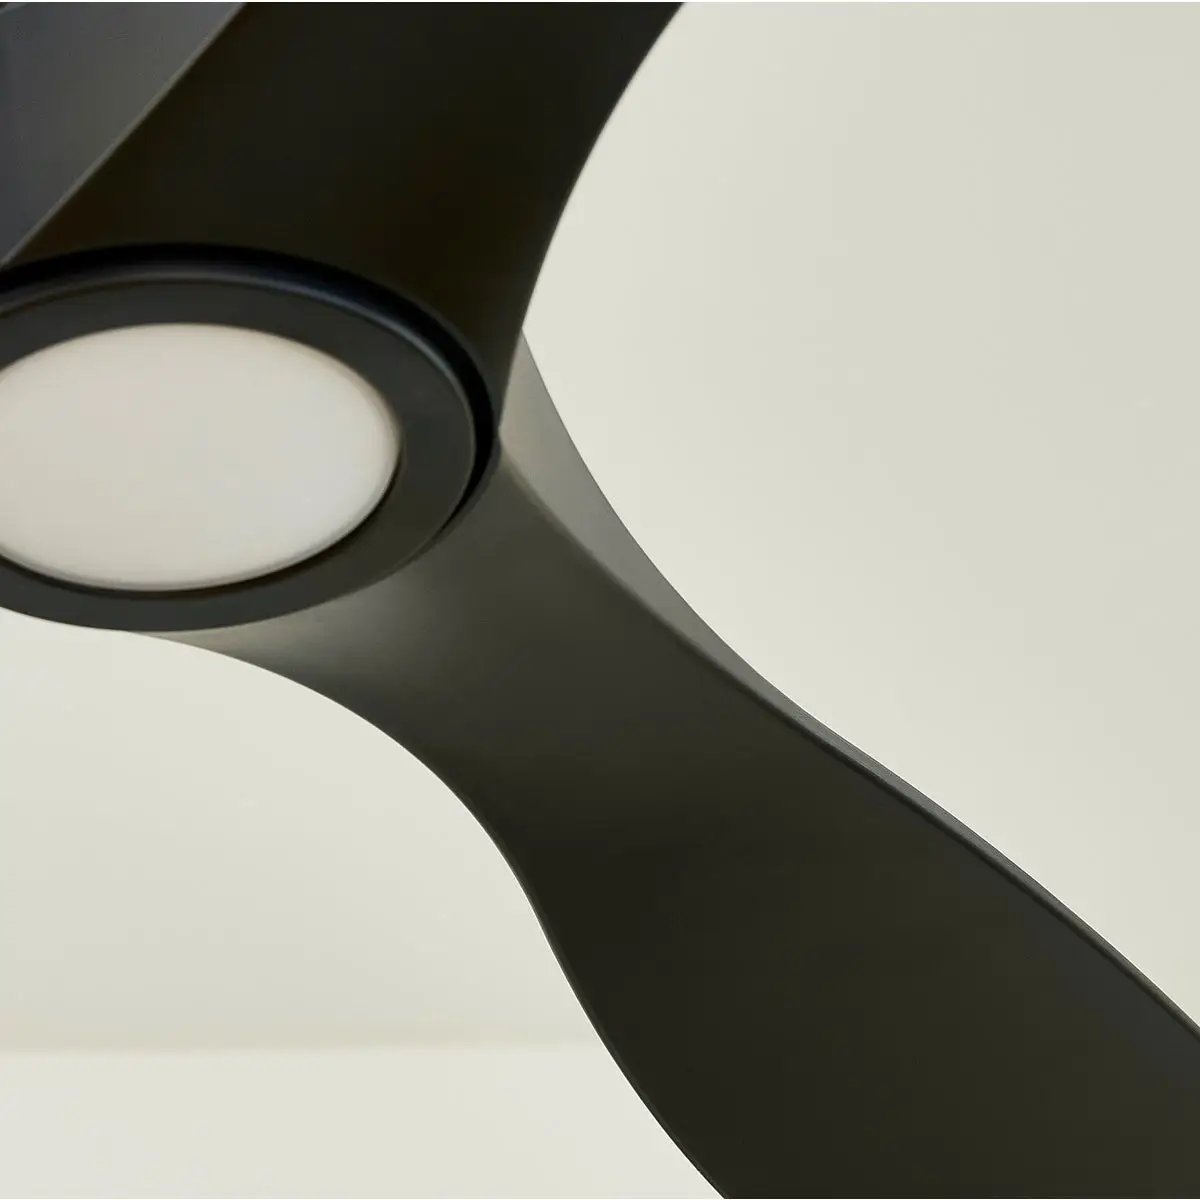 A close-up of a modern ceiling fan with light, featuring a sleek design and monochromatic blades. Provides powerful and long-lasting air circulation.